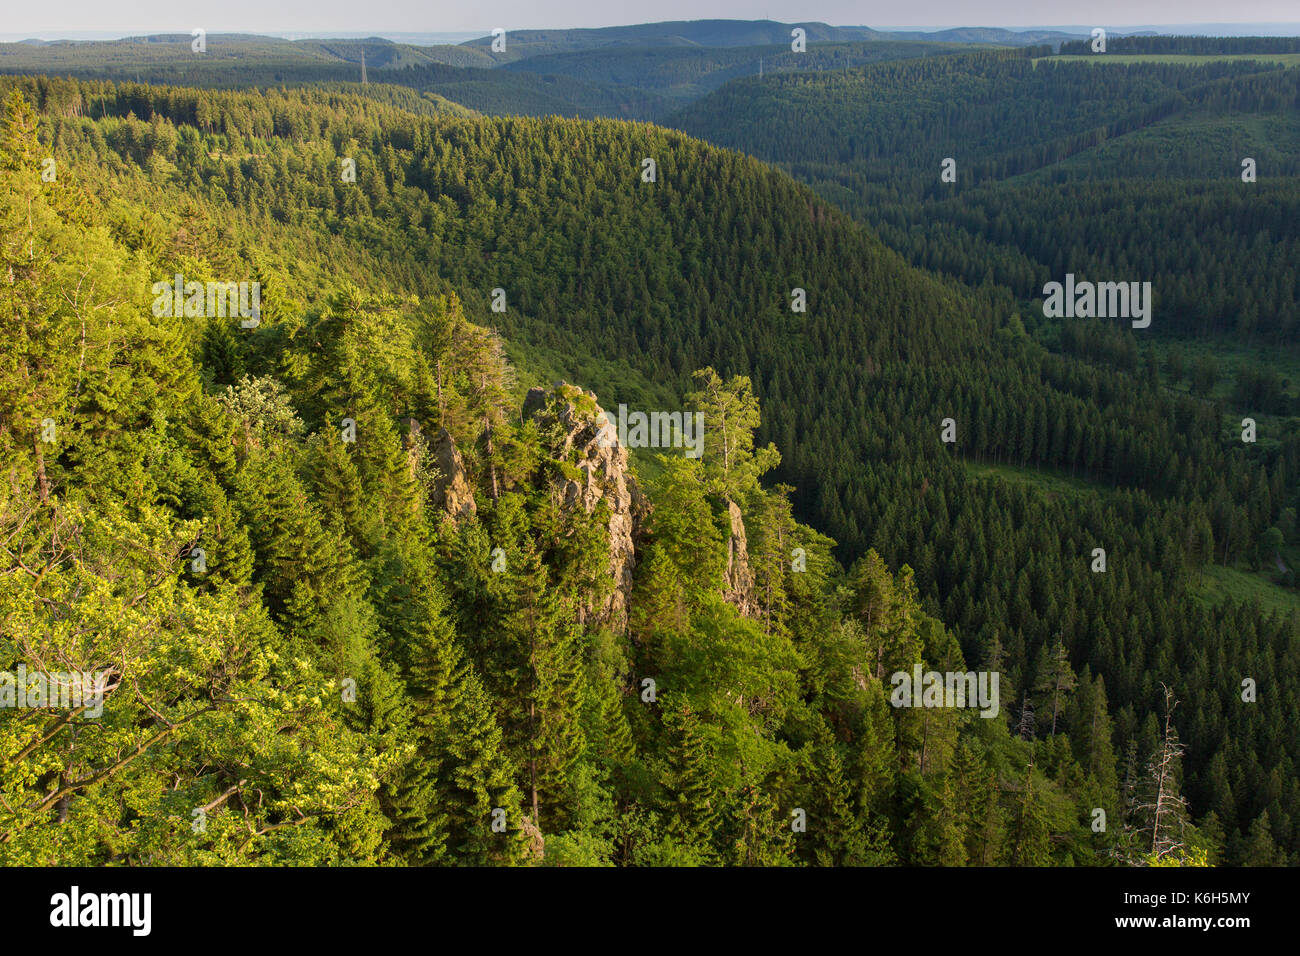 Hahnenkleeklippen / Hahnenklee Crags at Upper Harz / Oberharz in the Harz National Park, Lower Saxony, Germany Stock Photo